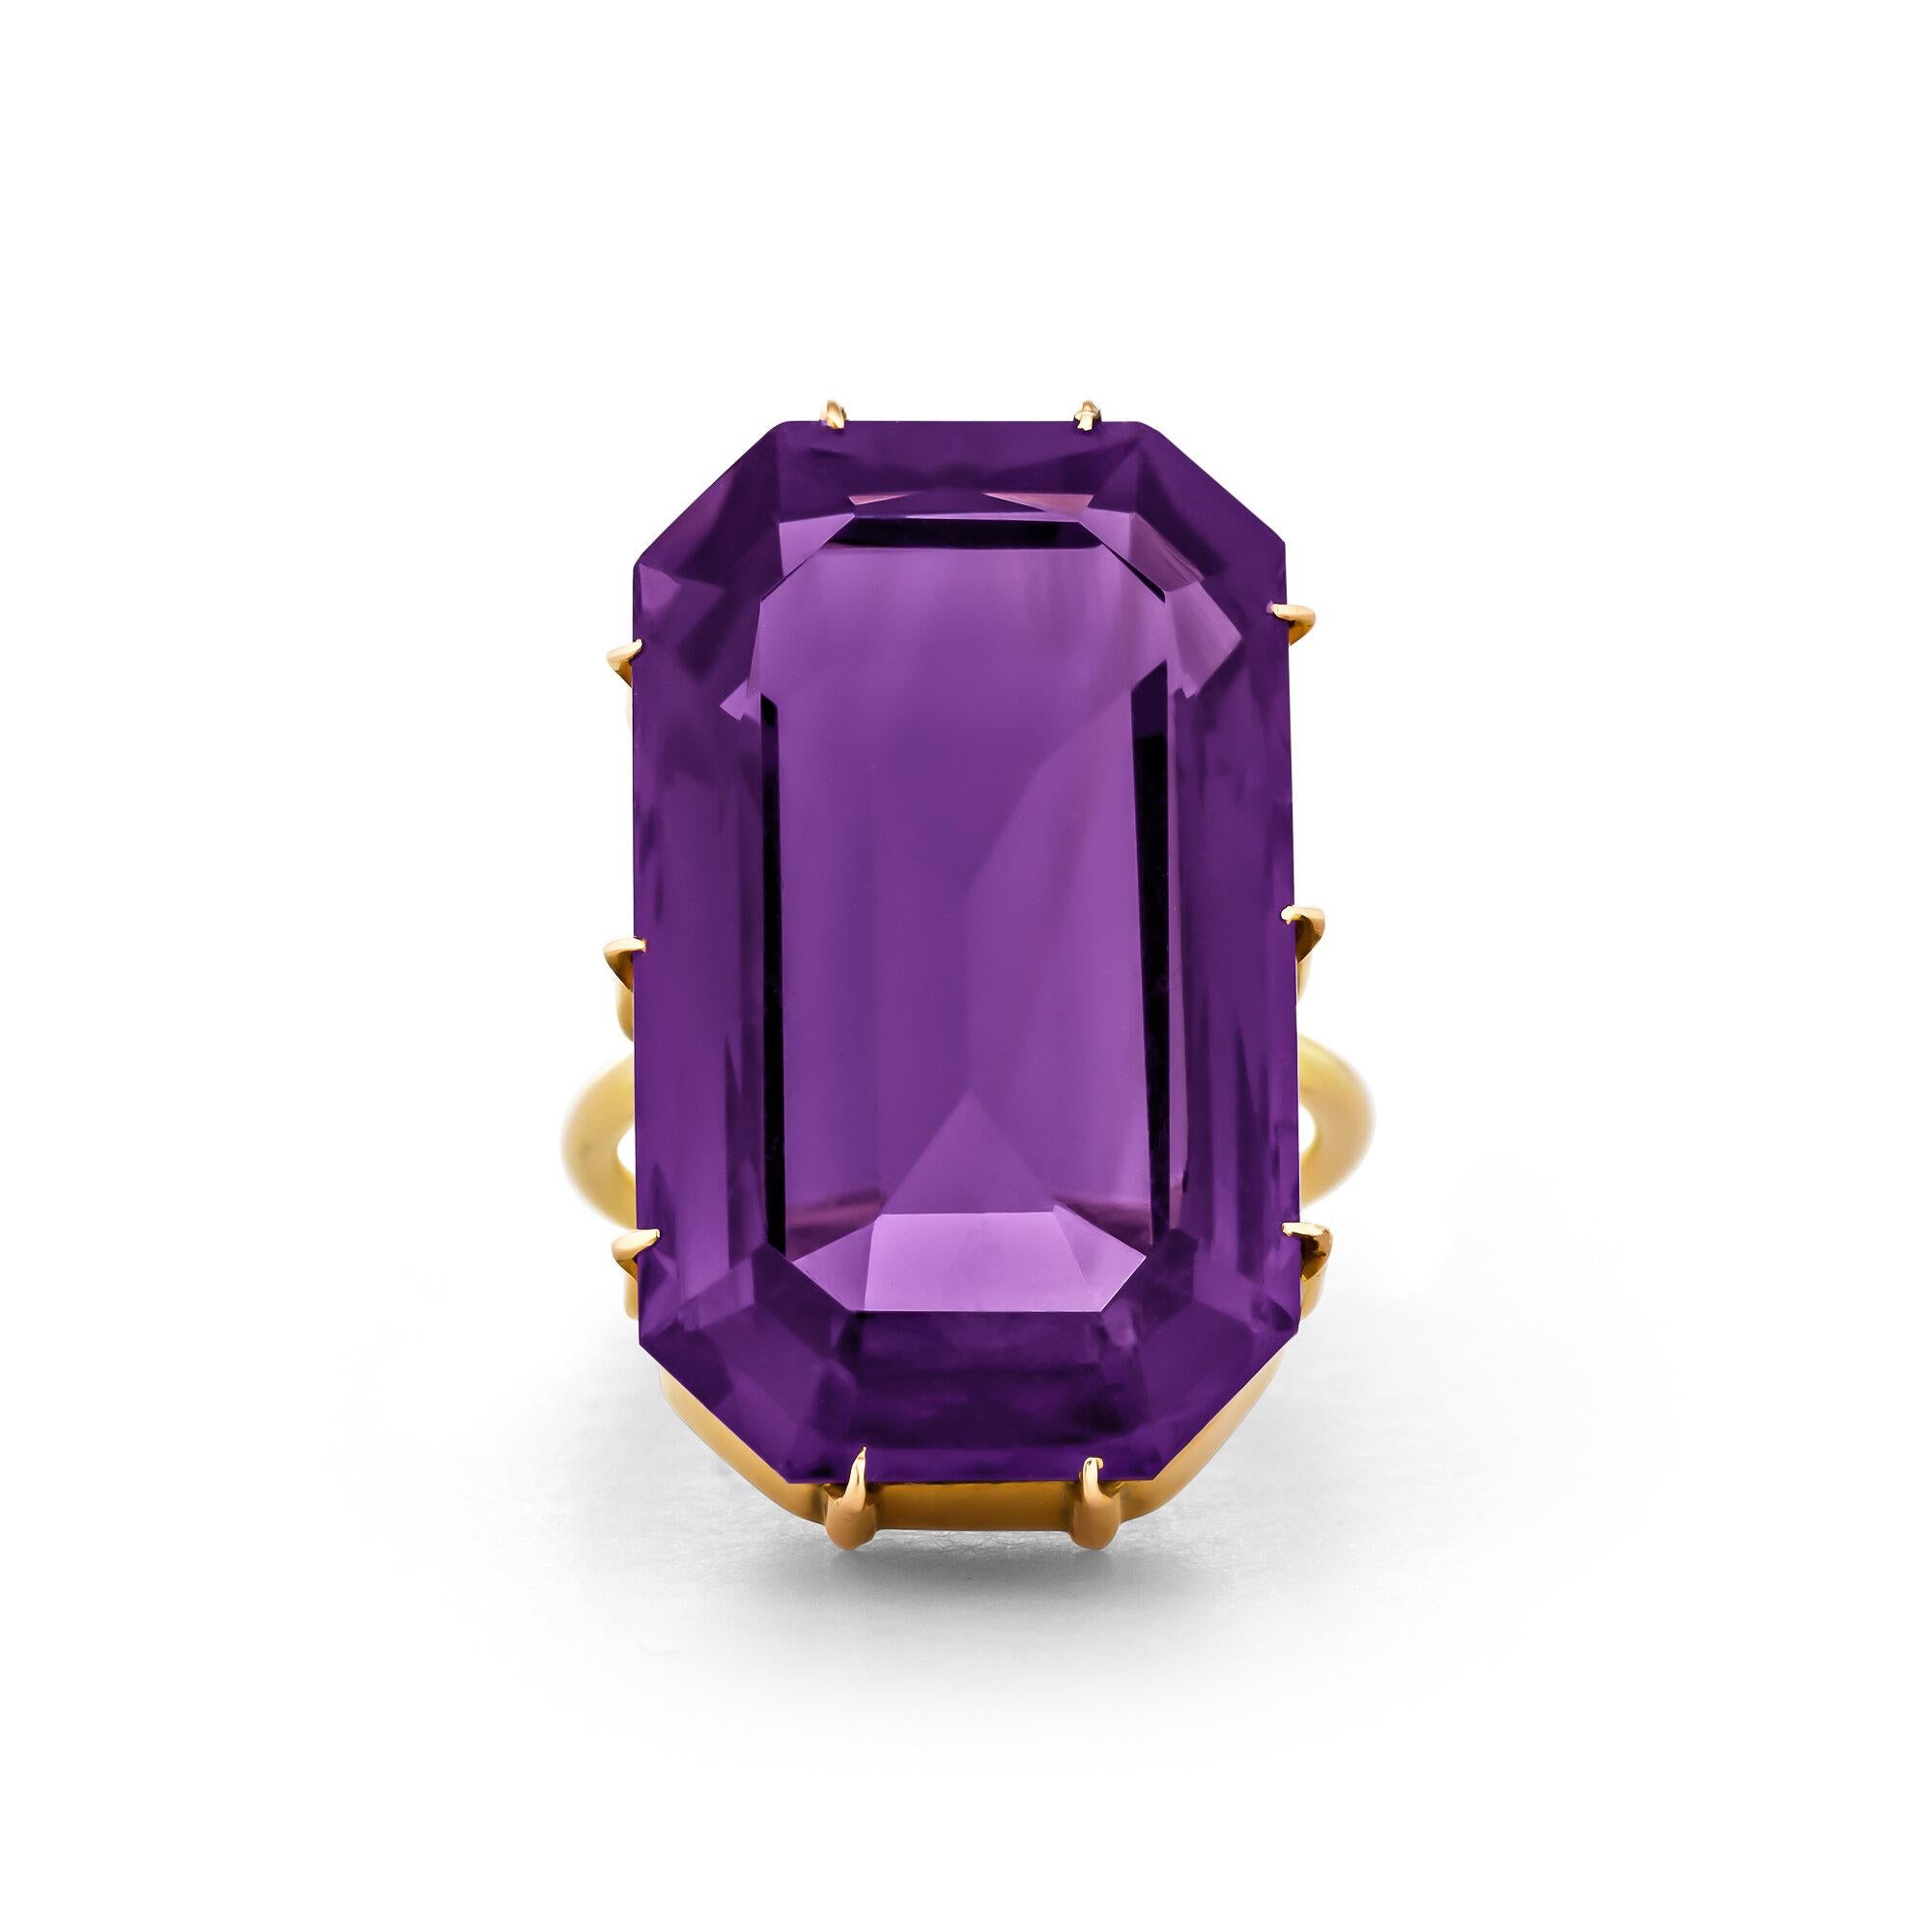 Sumptuously luminous with vivid violet hues, this Art Deco 28.05 carat amethyst ring is high style at its best.  With a handmade 18 karat yellow gold ten prong mounting, this circa 1910 statement ring clearly reflects the elegance of that celebrated